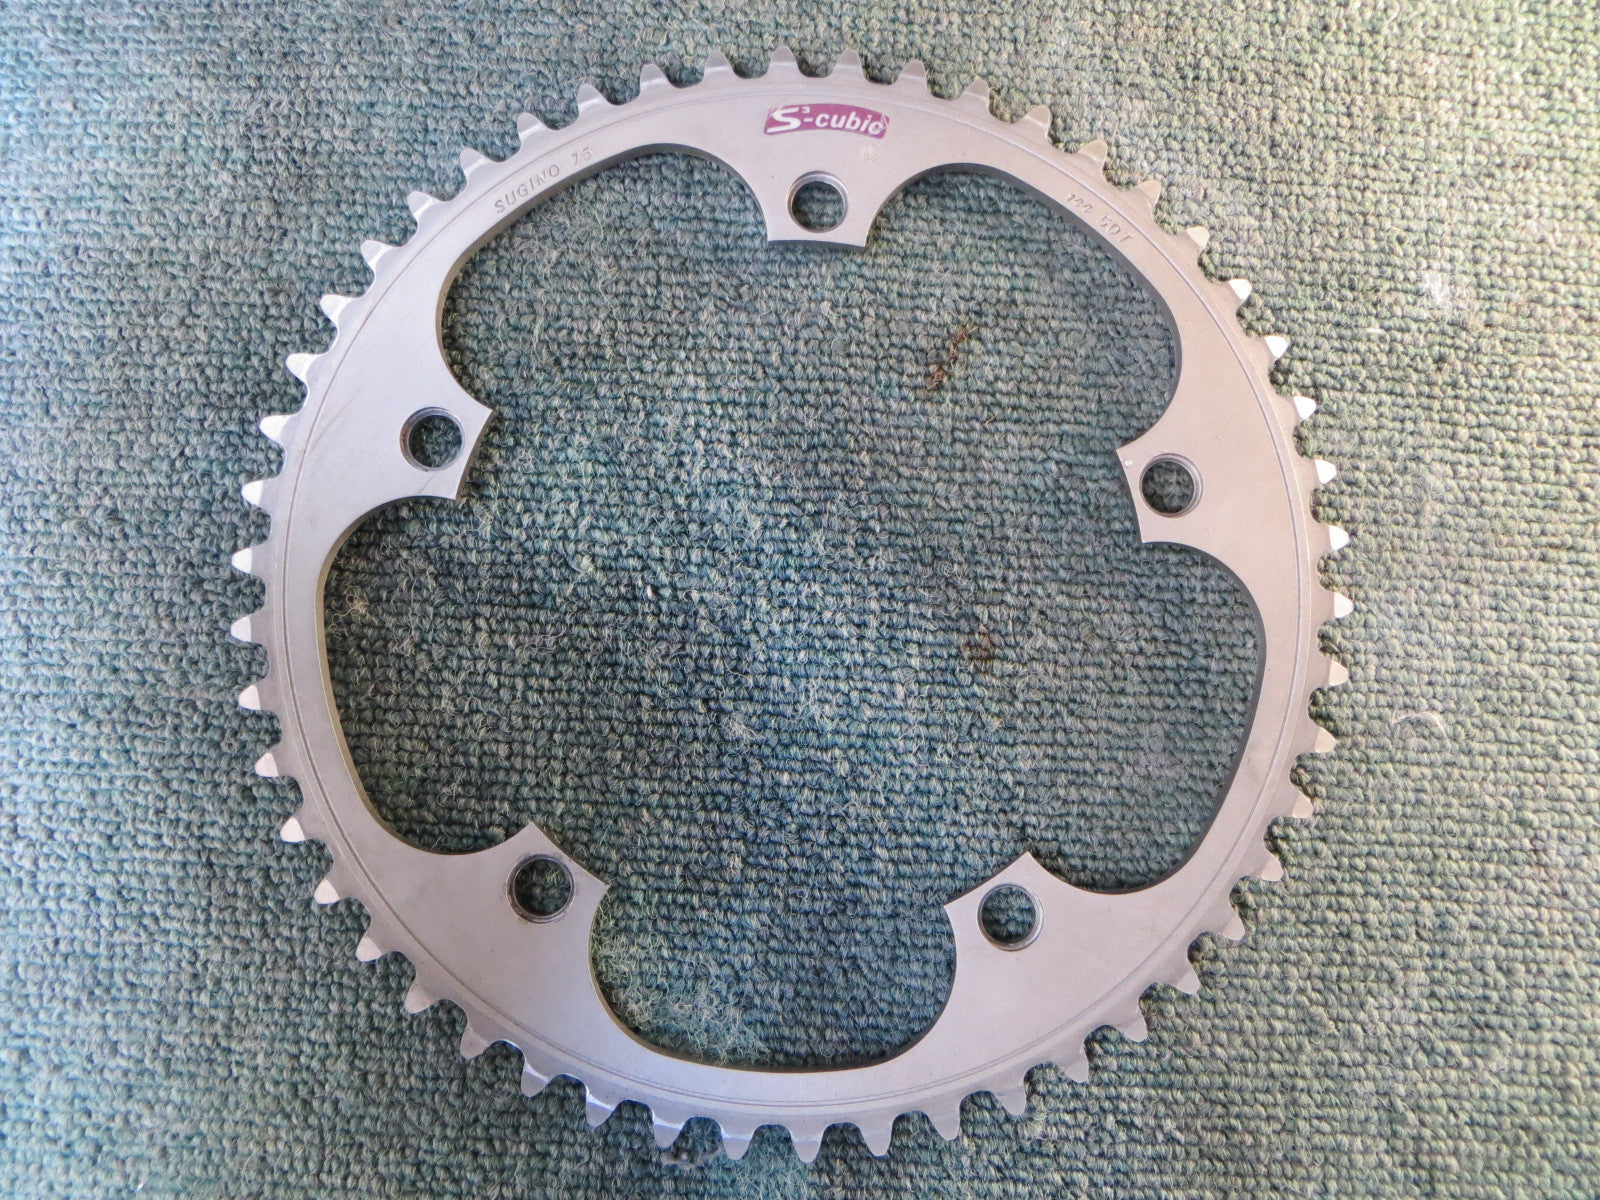 Sugino S-cubic 144BCD 1/8" NJS Matte Finish Chainring 50T (15112809)